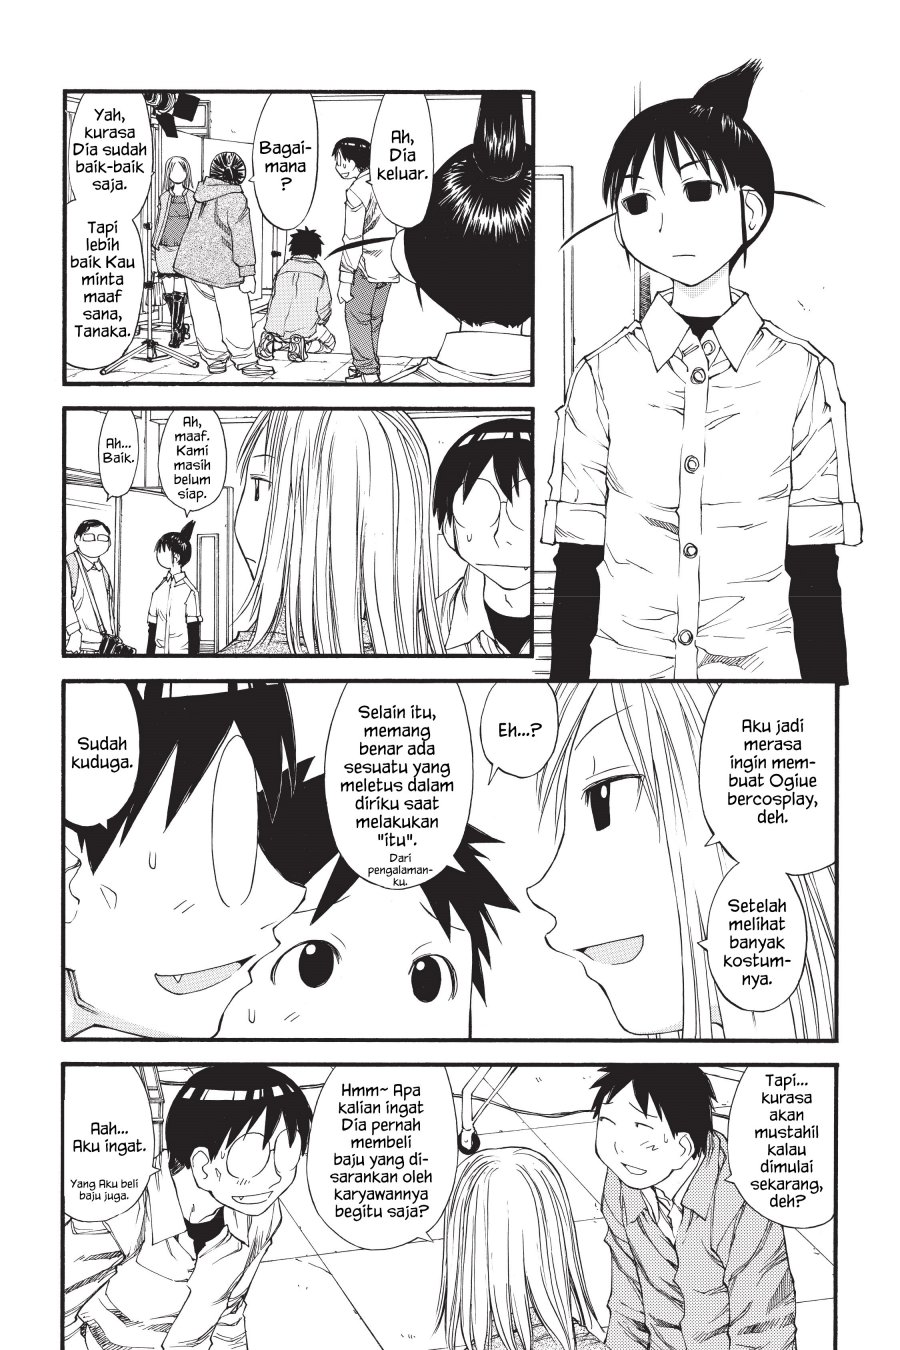 Genshiken – The Society for the Study of Modern Visual Culture Chapter 31 Image 12